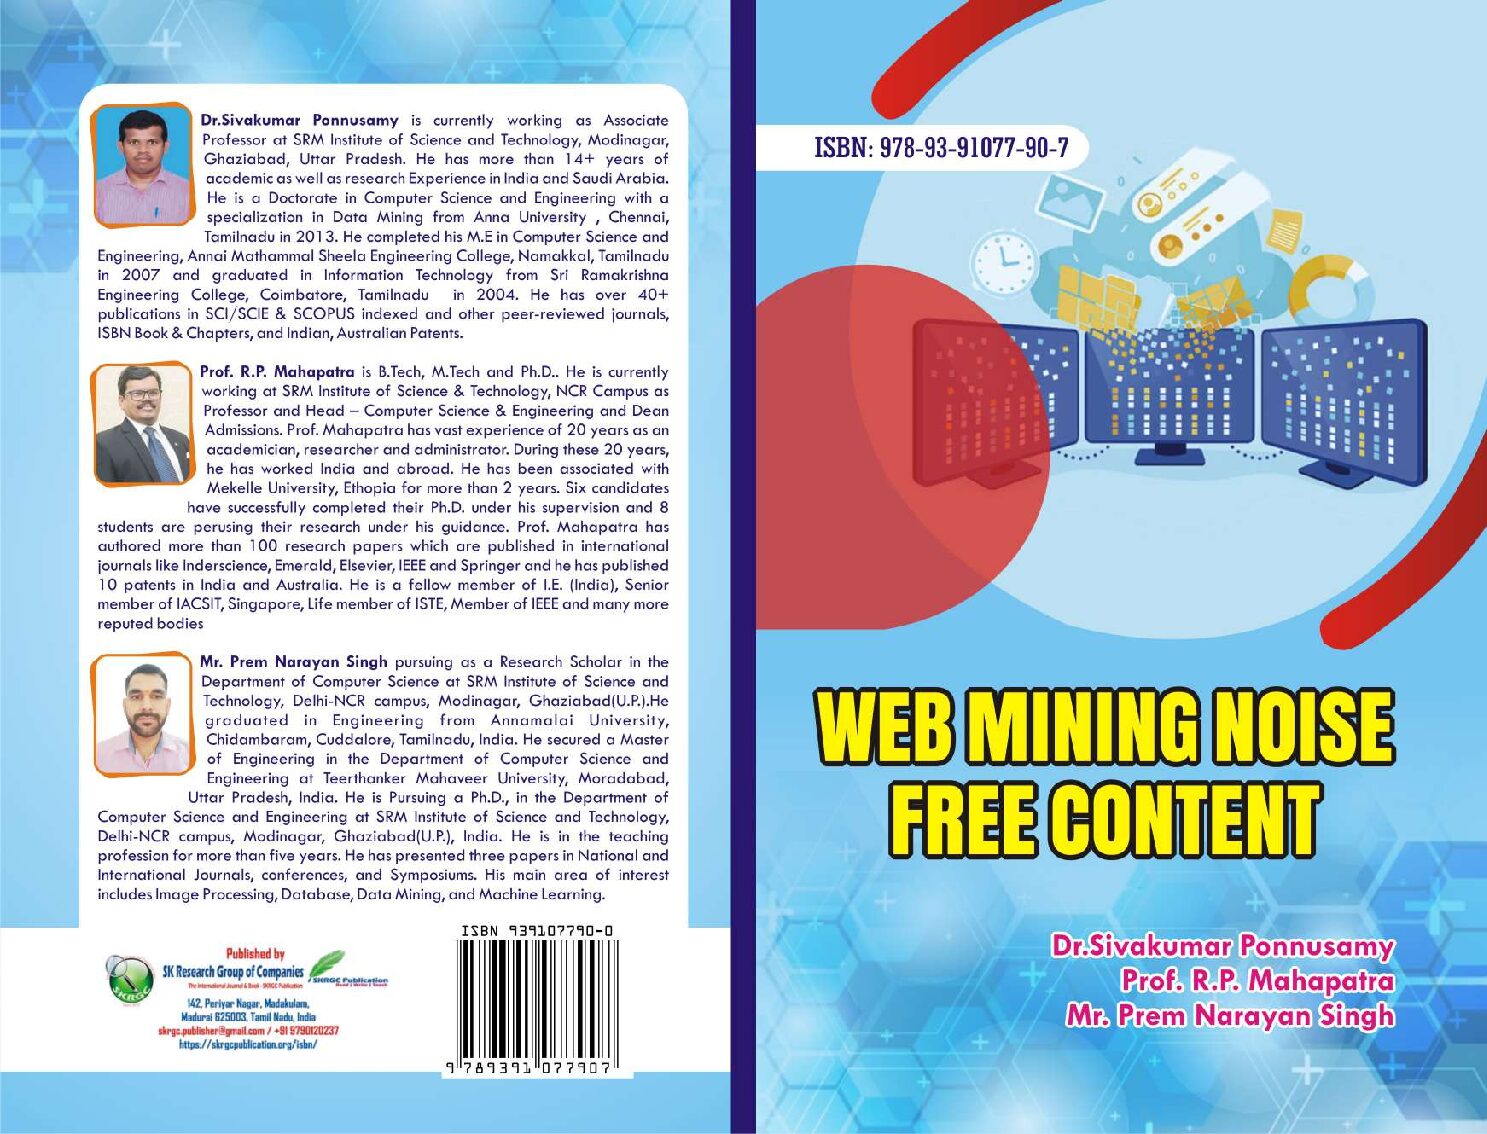 WEB MINING NOISE FREE CONTENT